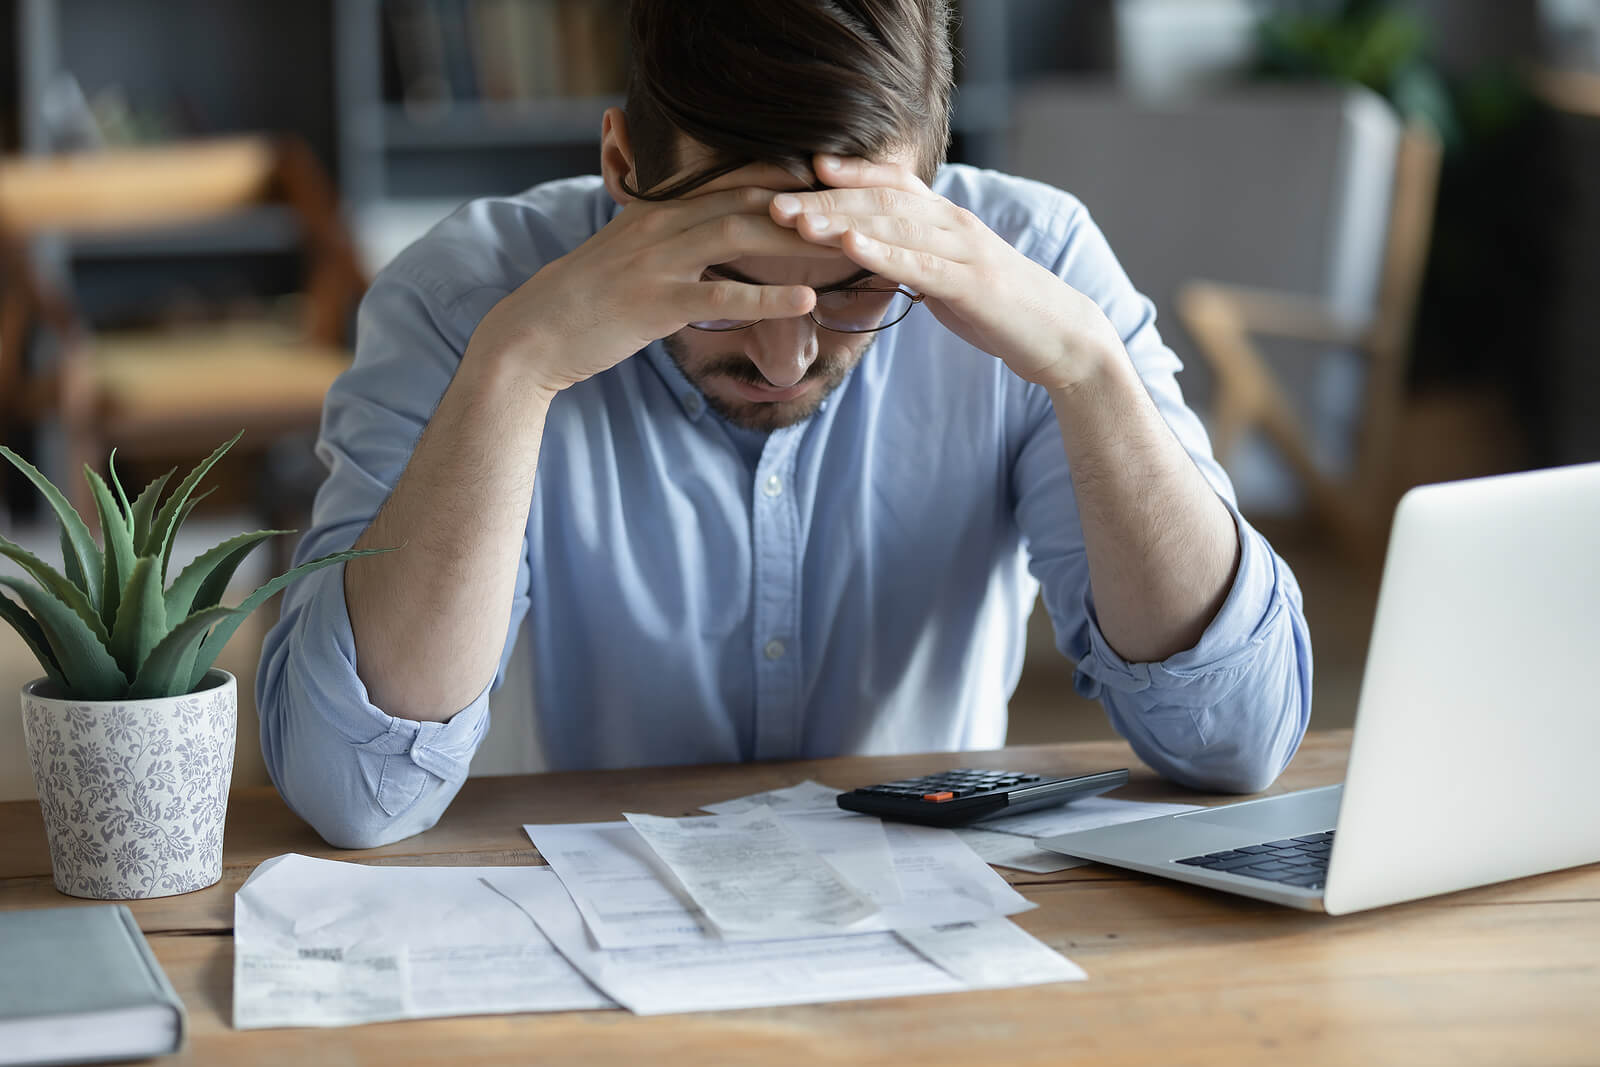 How to Write Off Bad Debt for Your Business